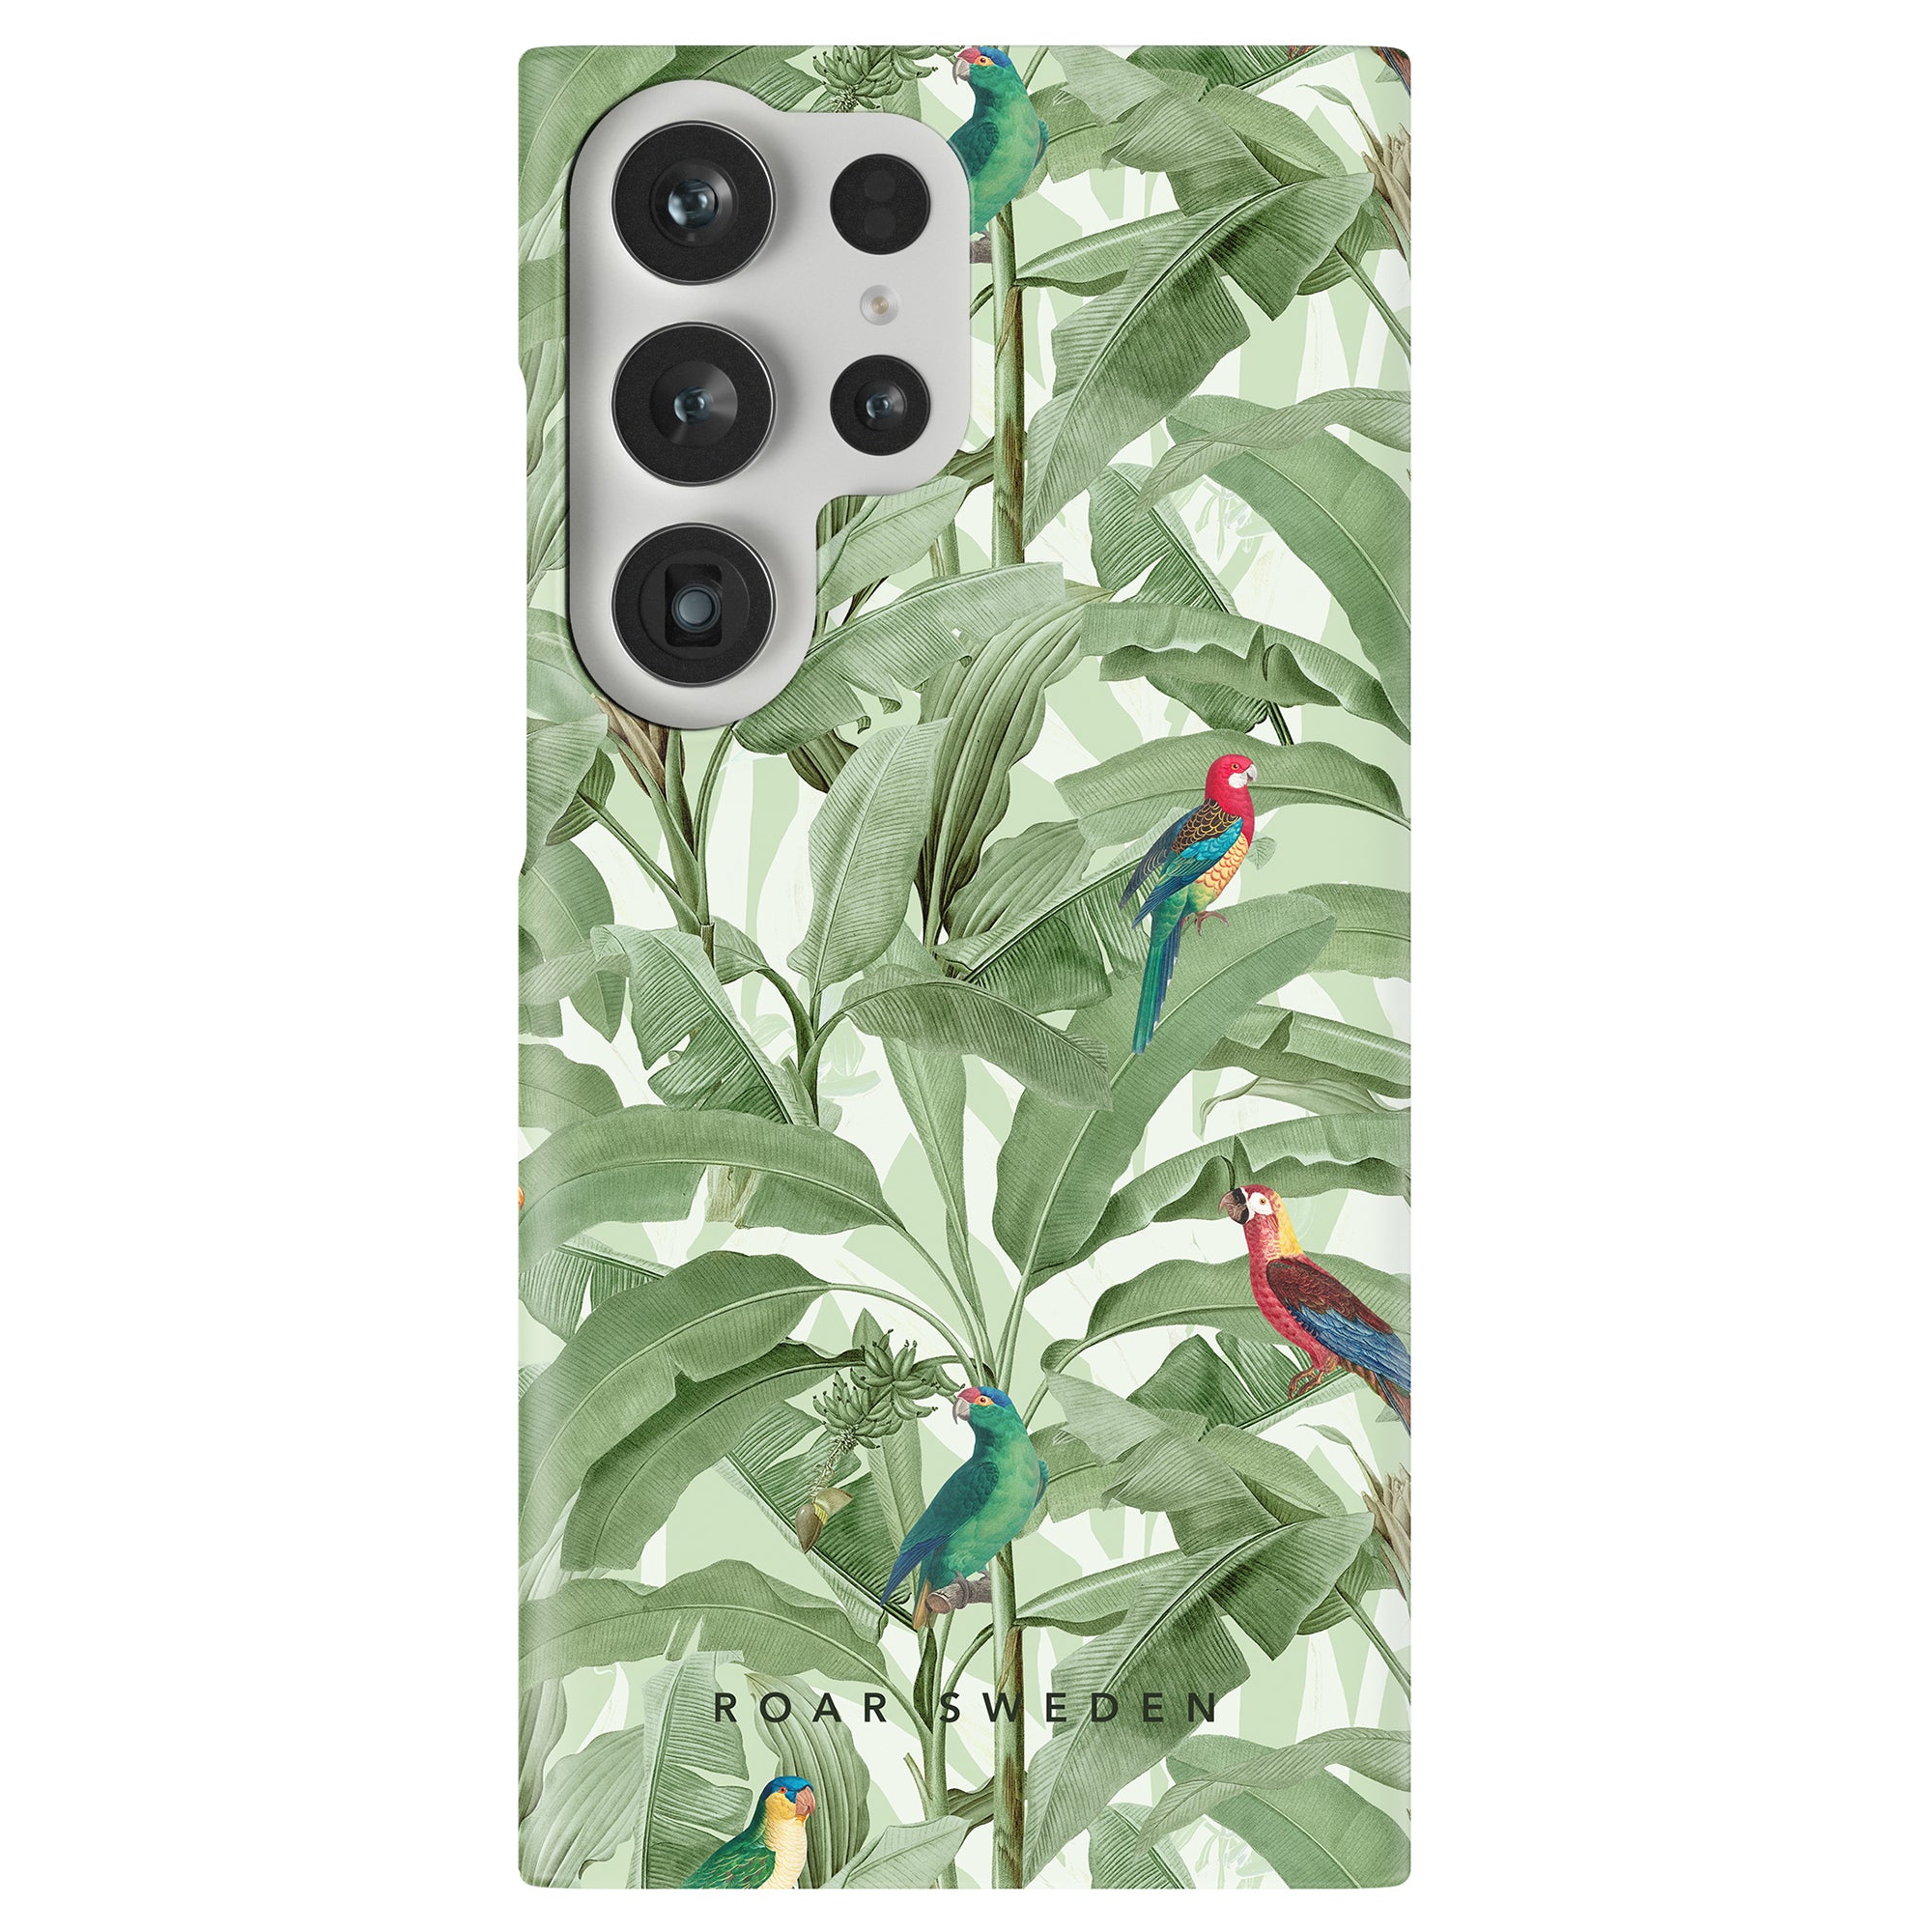 A Parrot Paradise slim case featuring a vibrant tropical parrot and lush foliage design, perfect for adding a pop of color to your device. Ideal for fans of unique, nature-inspired phone accessories.